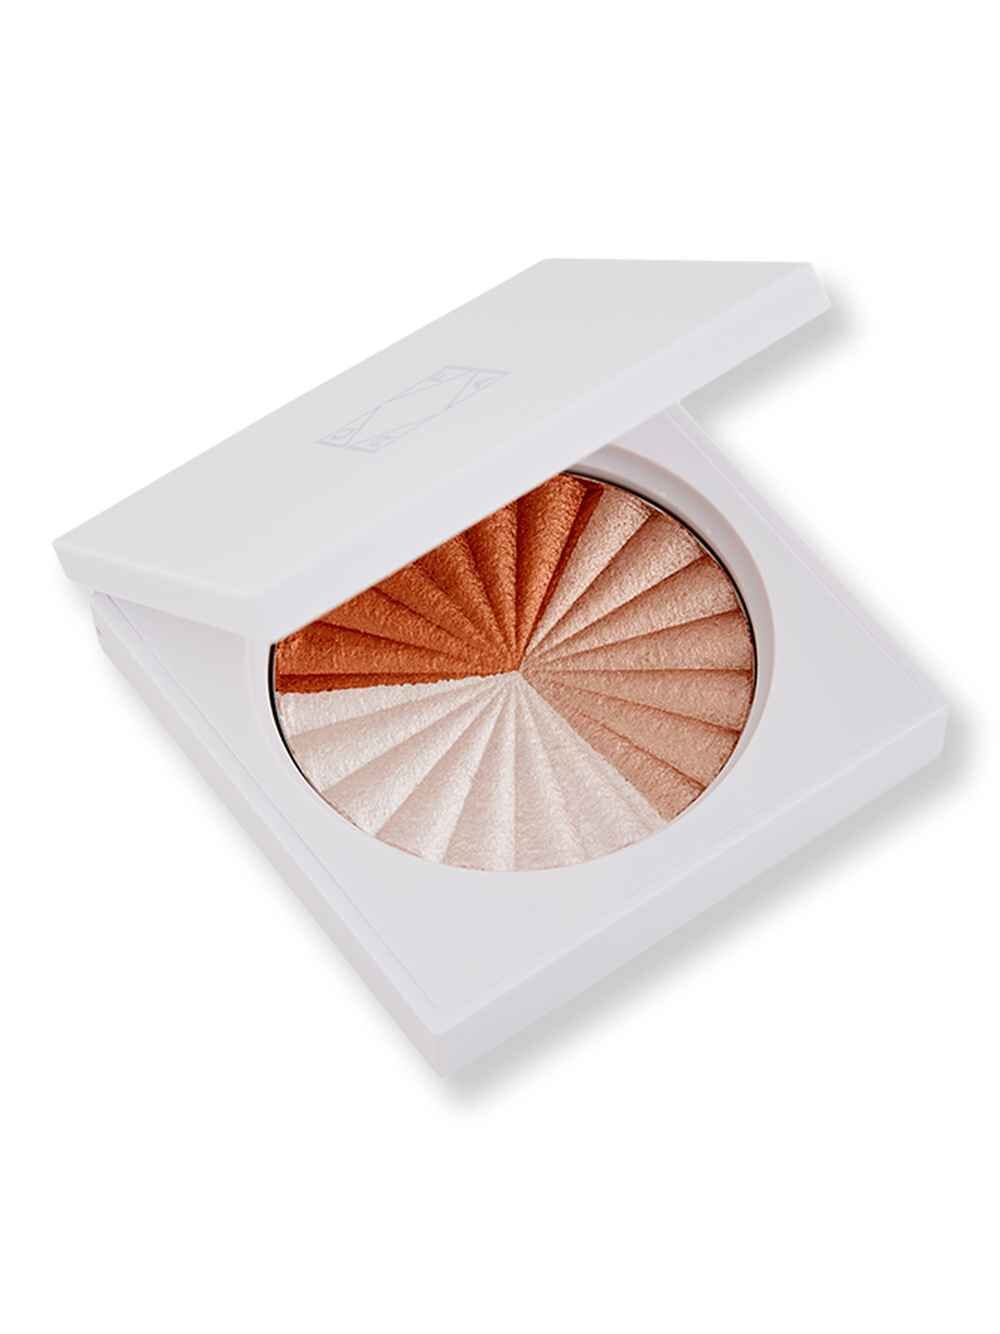 OFRA Cosmetics OFRA Cosmetics Highlighter 10 gEverglow Highlighters 